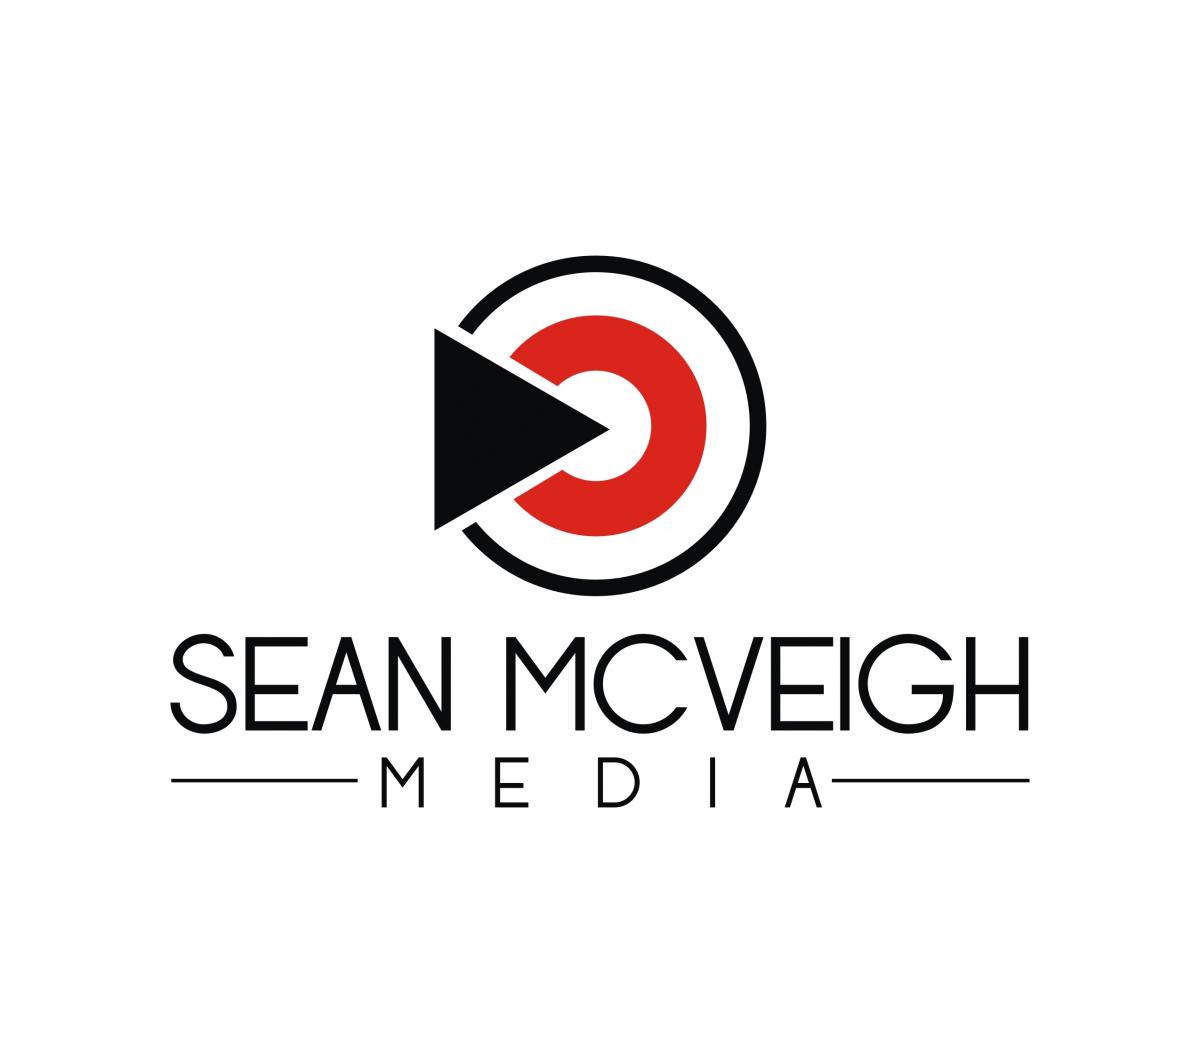 Sean McVeigh Media profile on Qualified.One